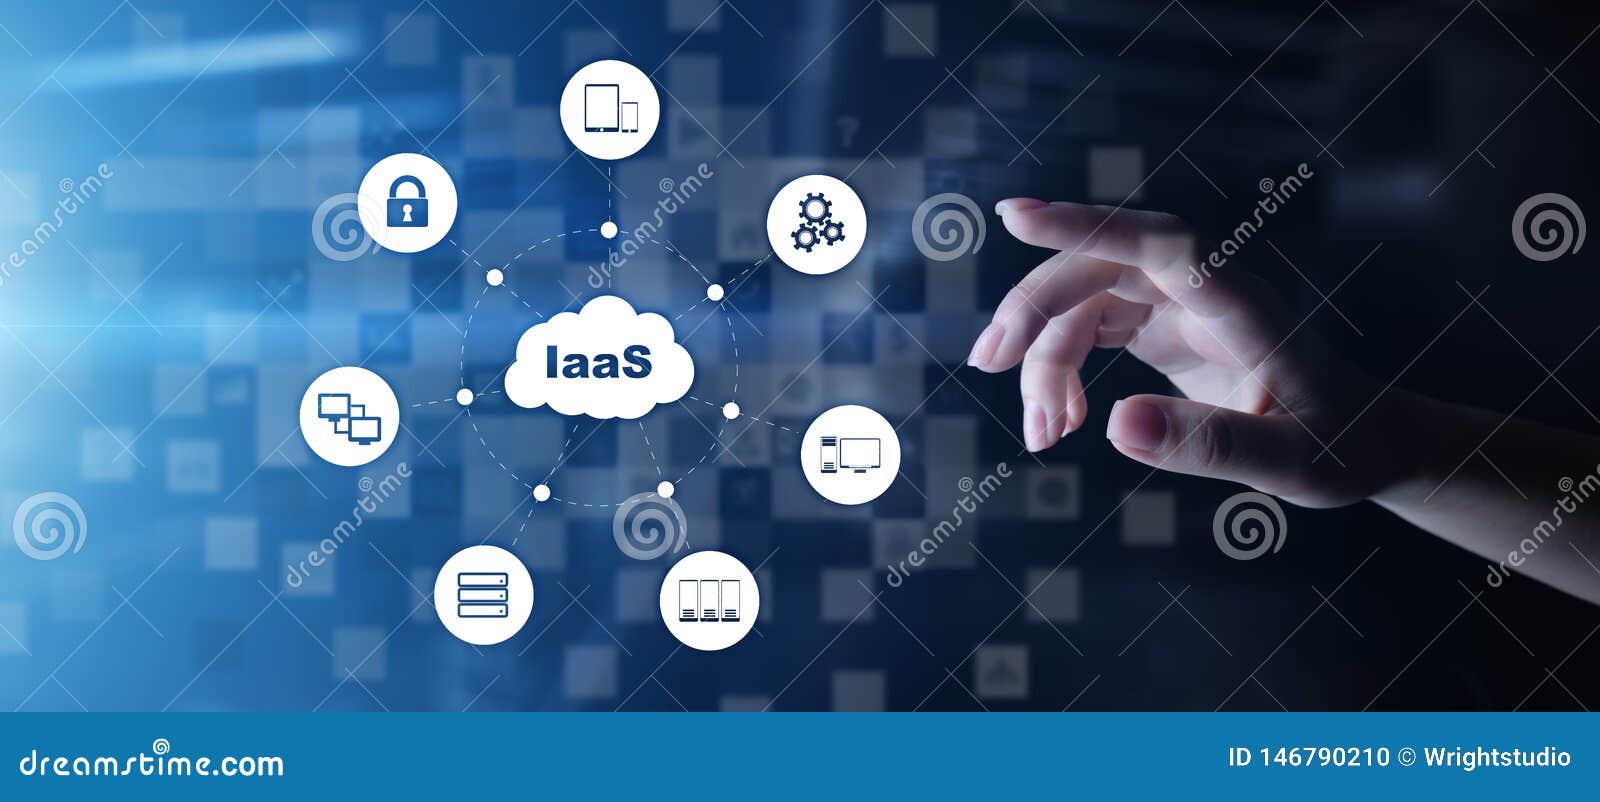 iaas - infrastructure as a service, networking and application platform. internet and technology concept